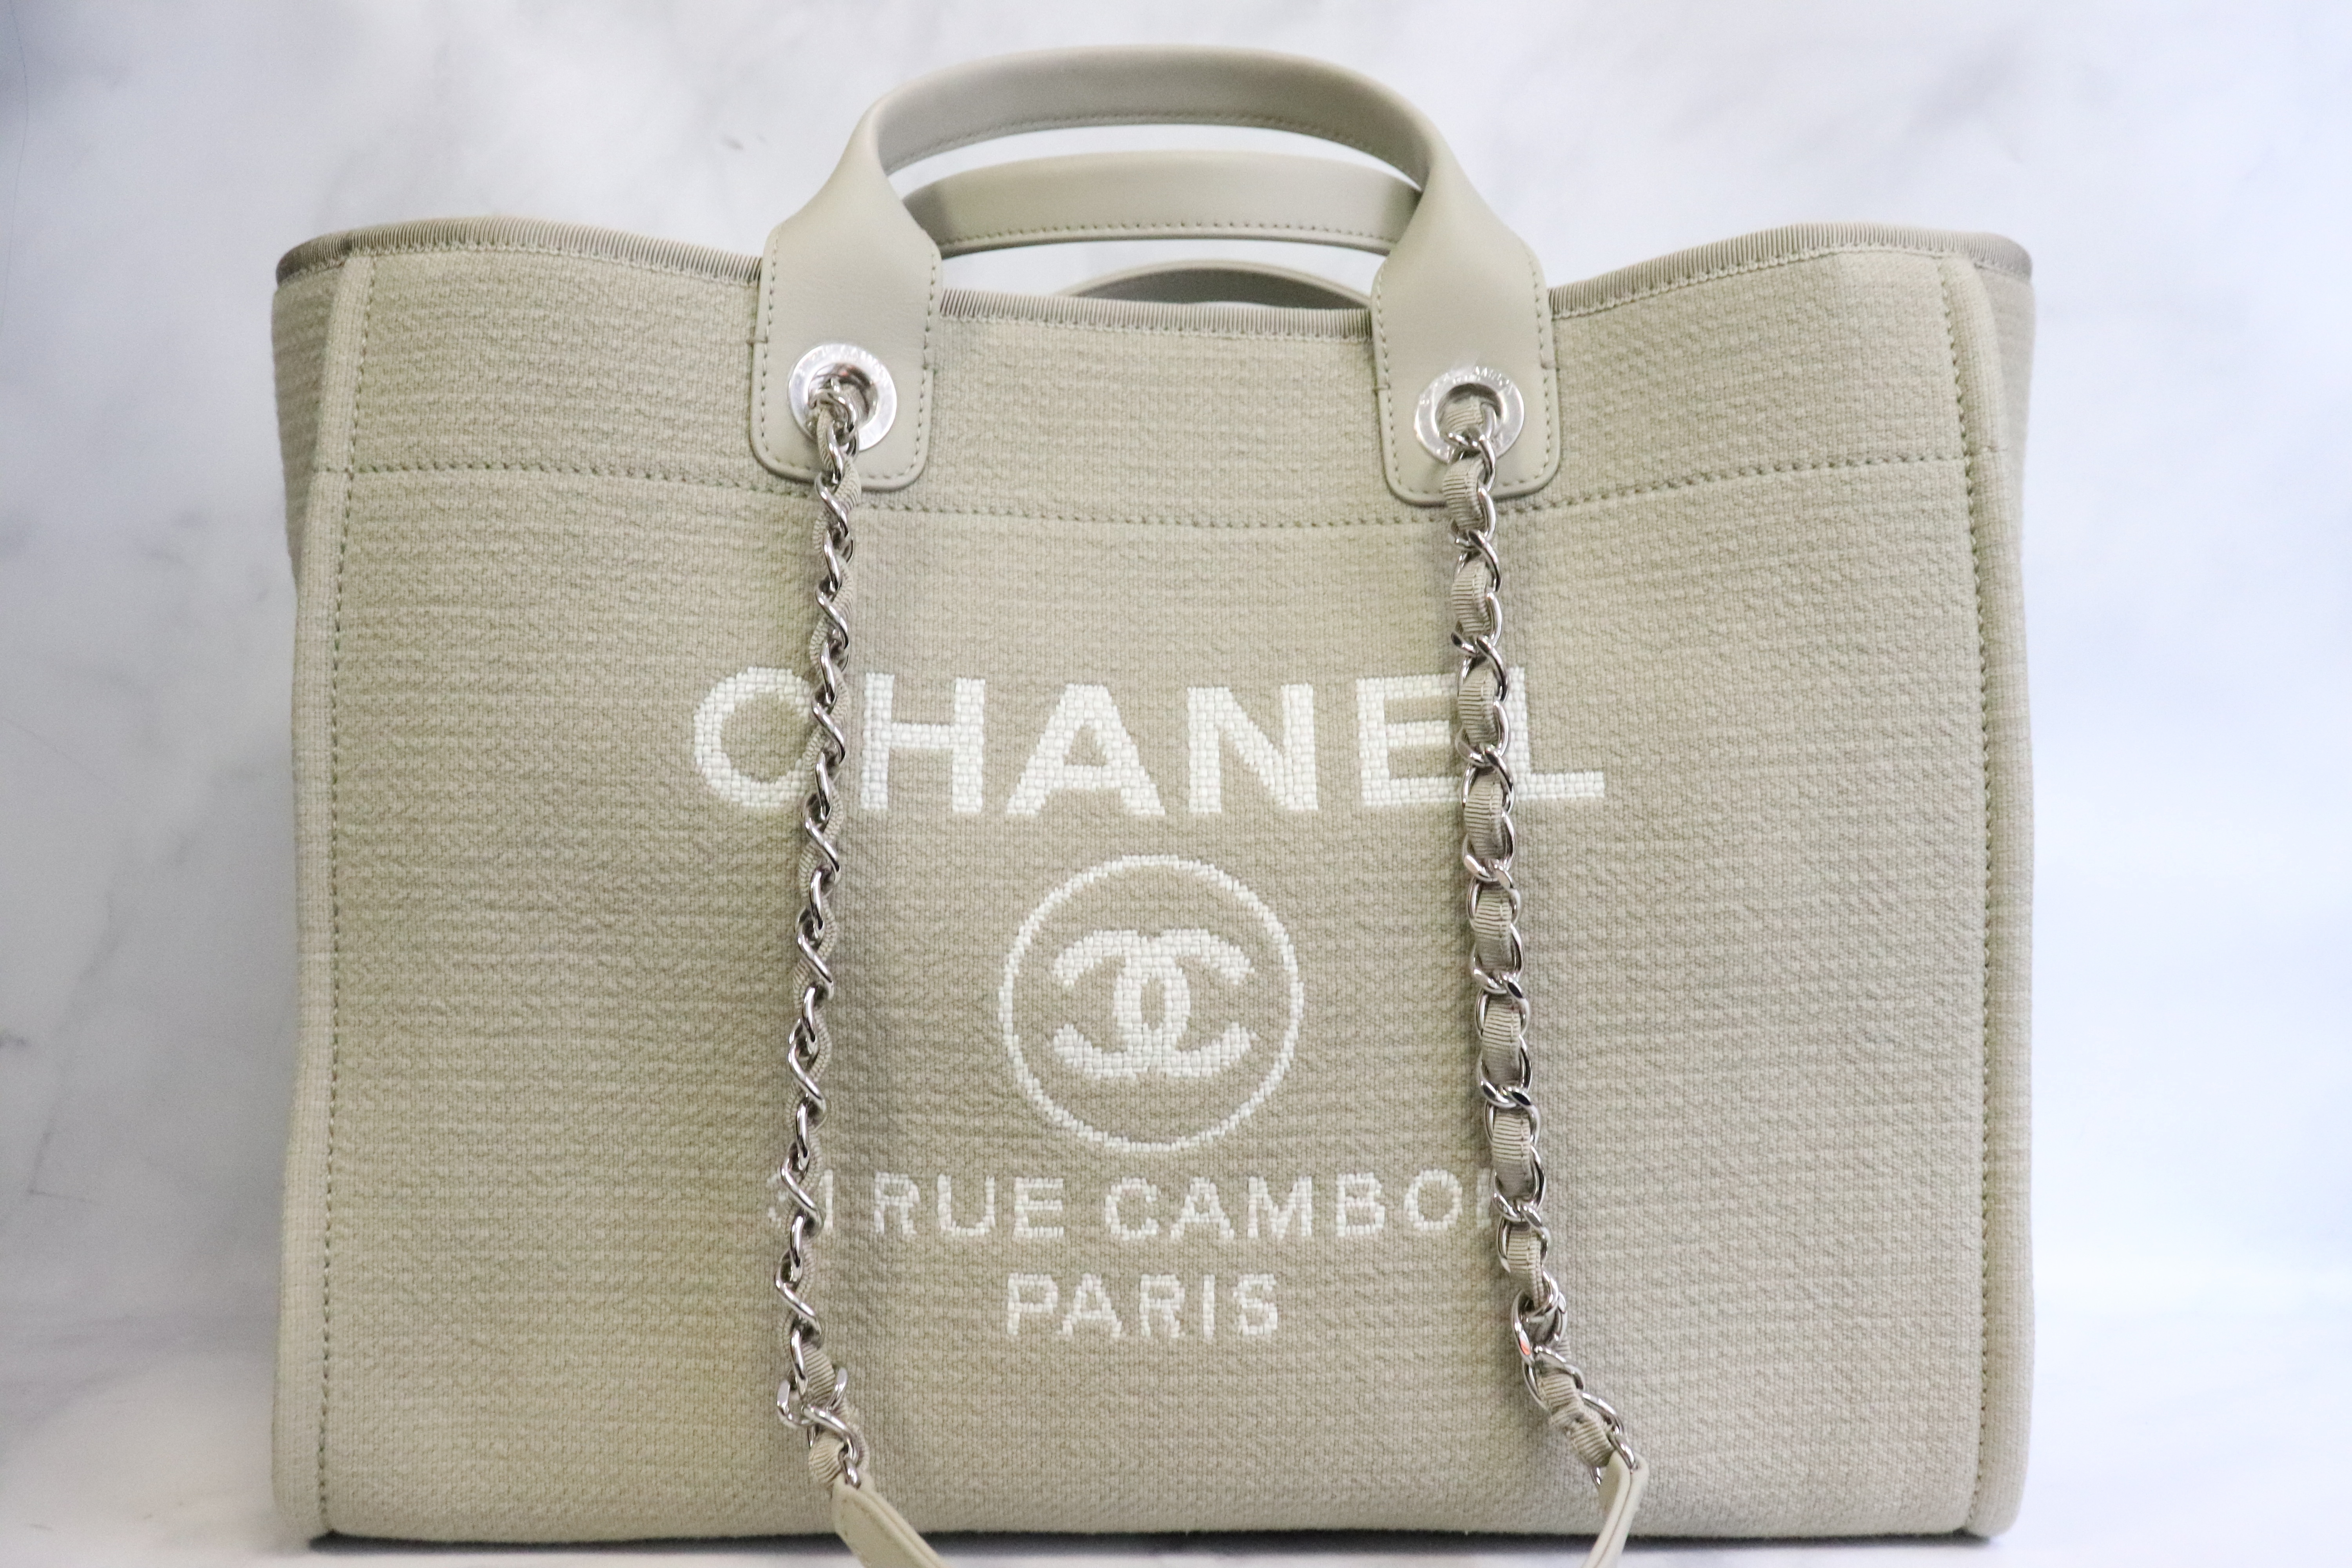 Chanel Deauville, Large, Khaki Canvas with Pouch, New in Box